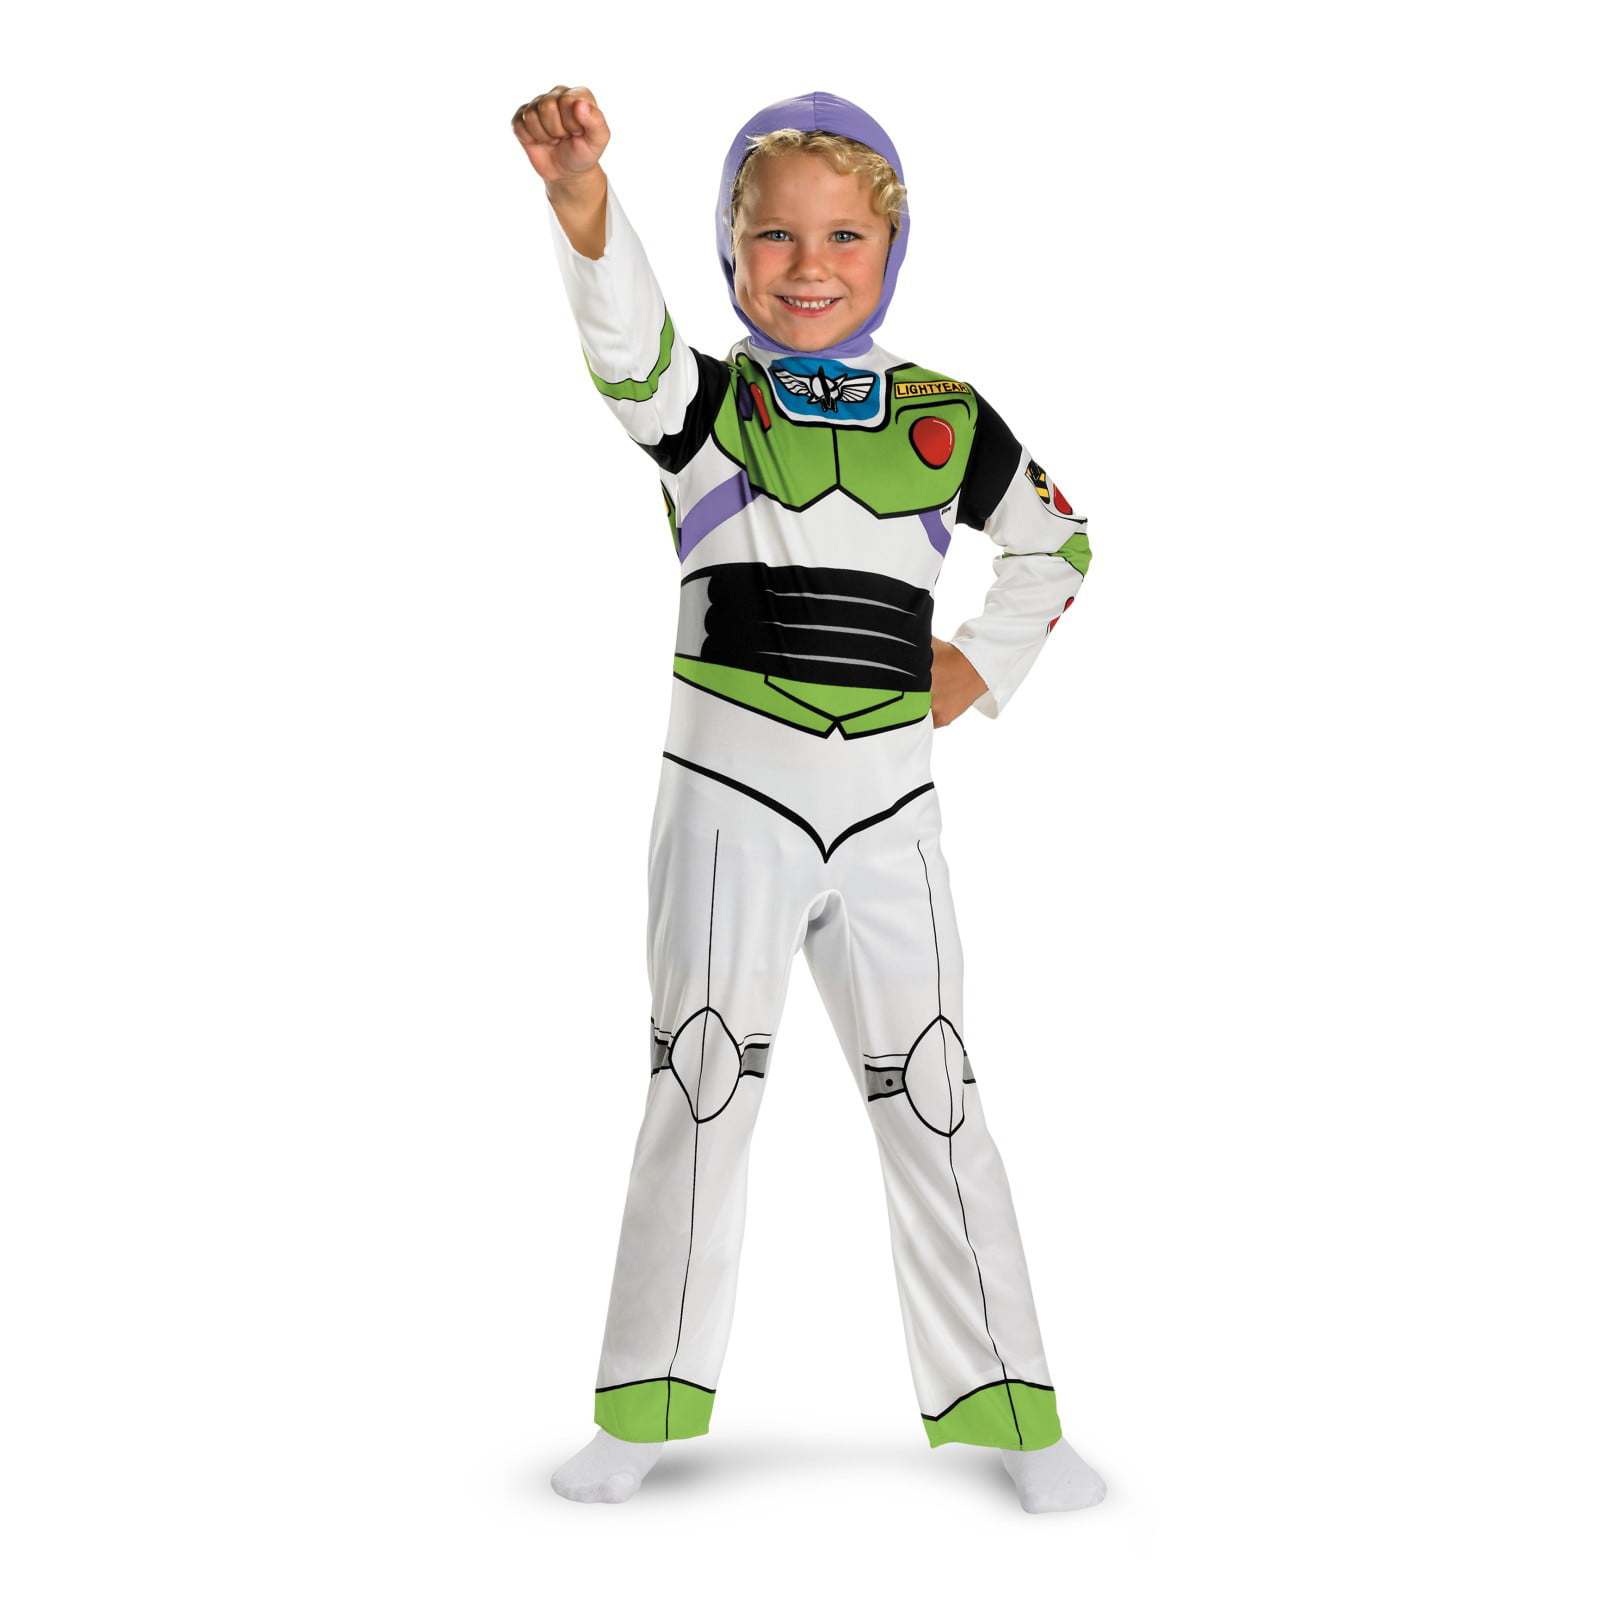 12-18 Months Toy Story Buzz Lightyear Infant/Toddler Costumes 